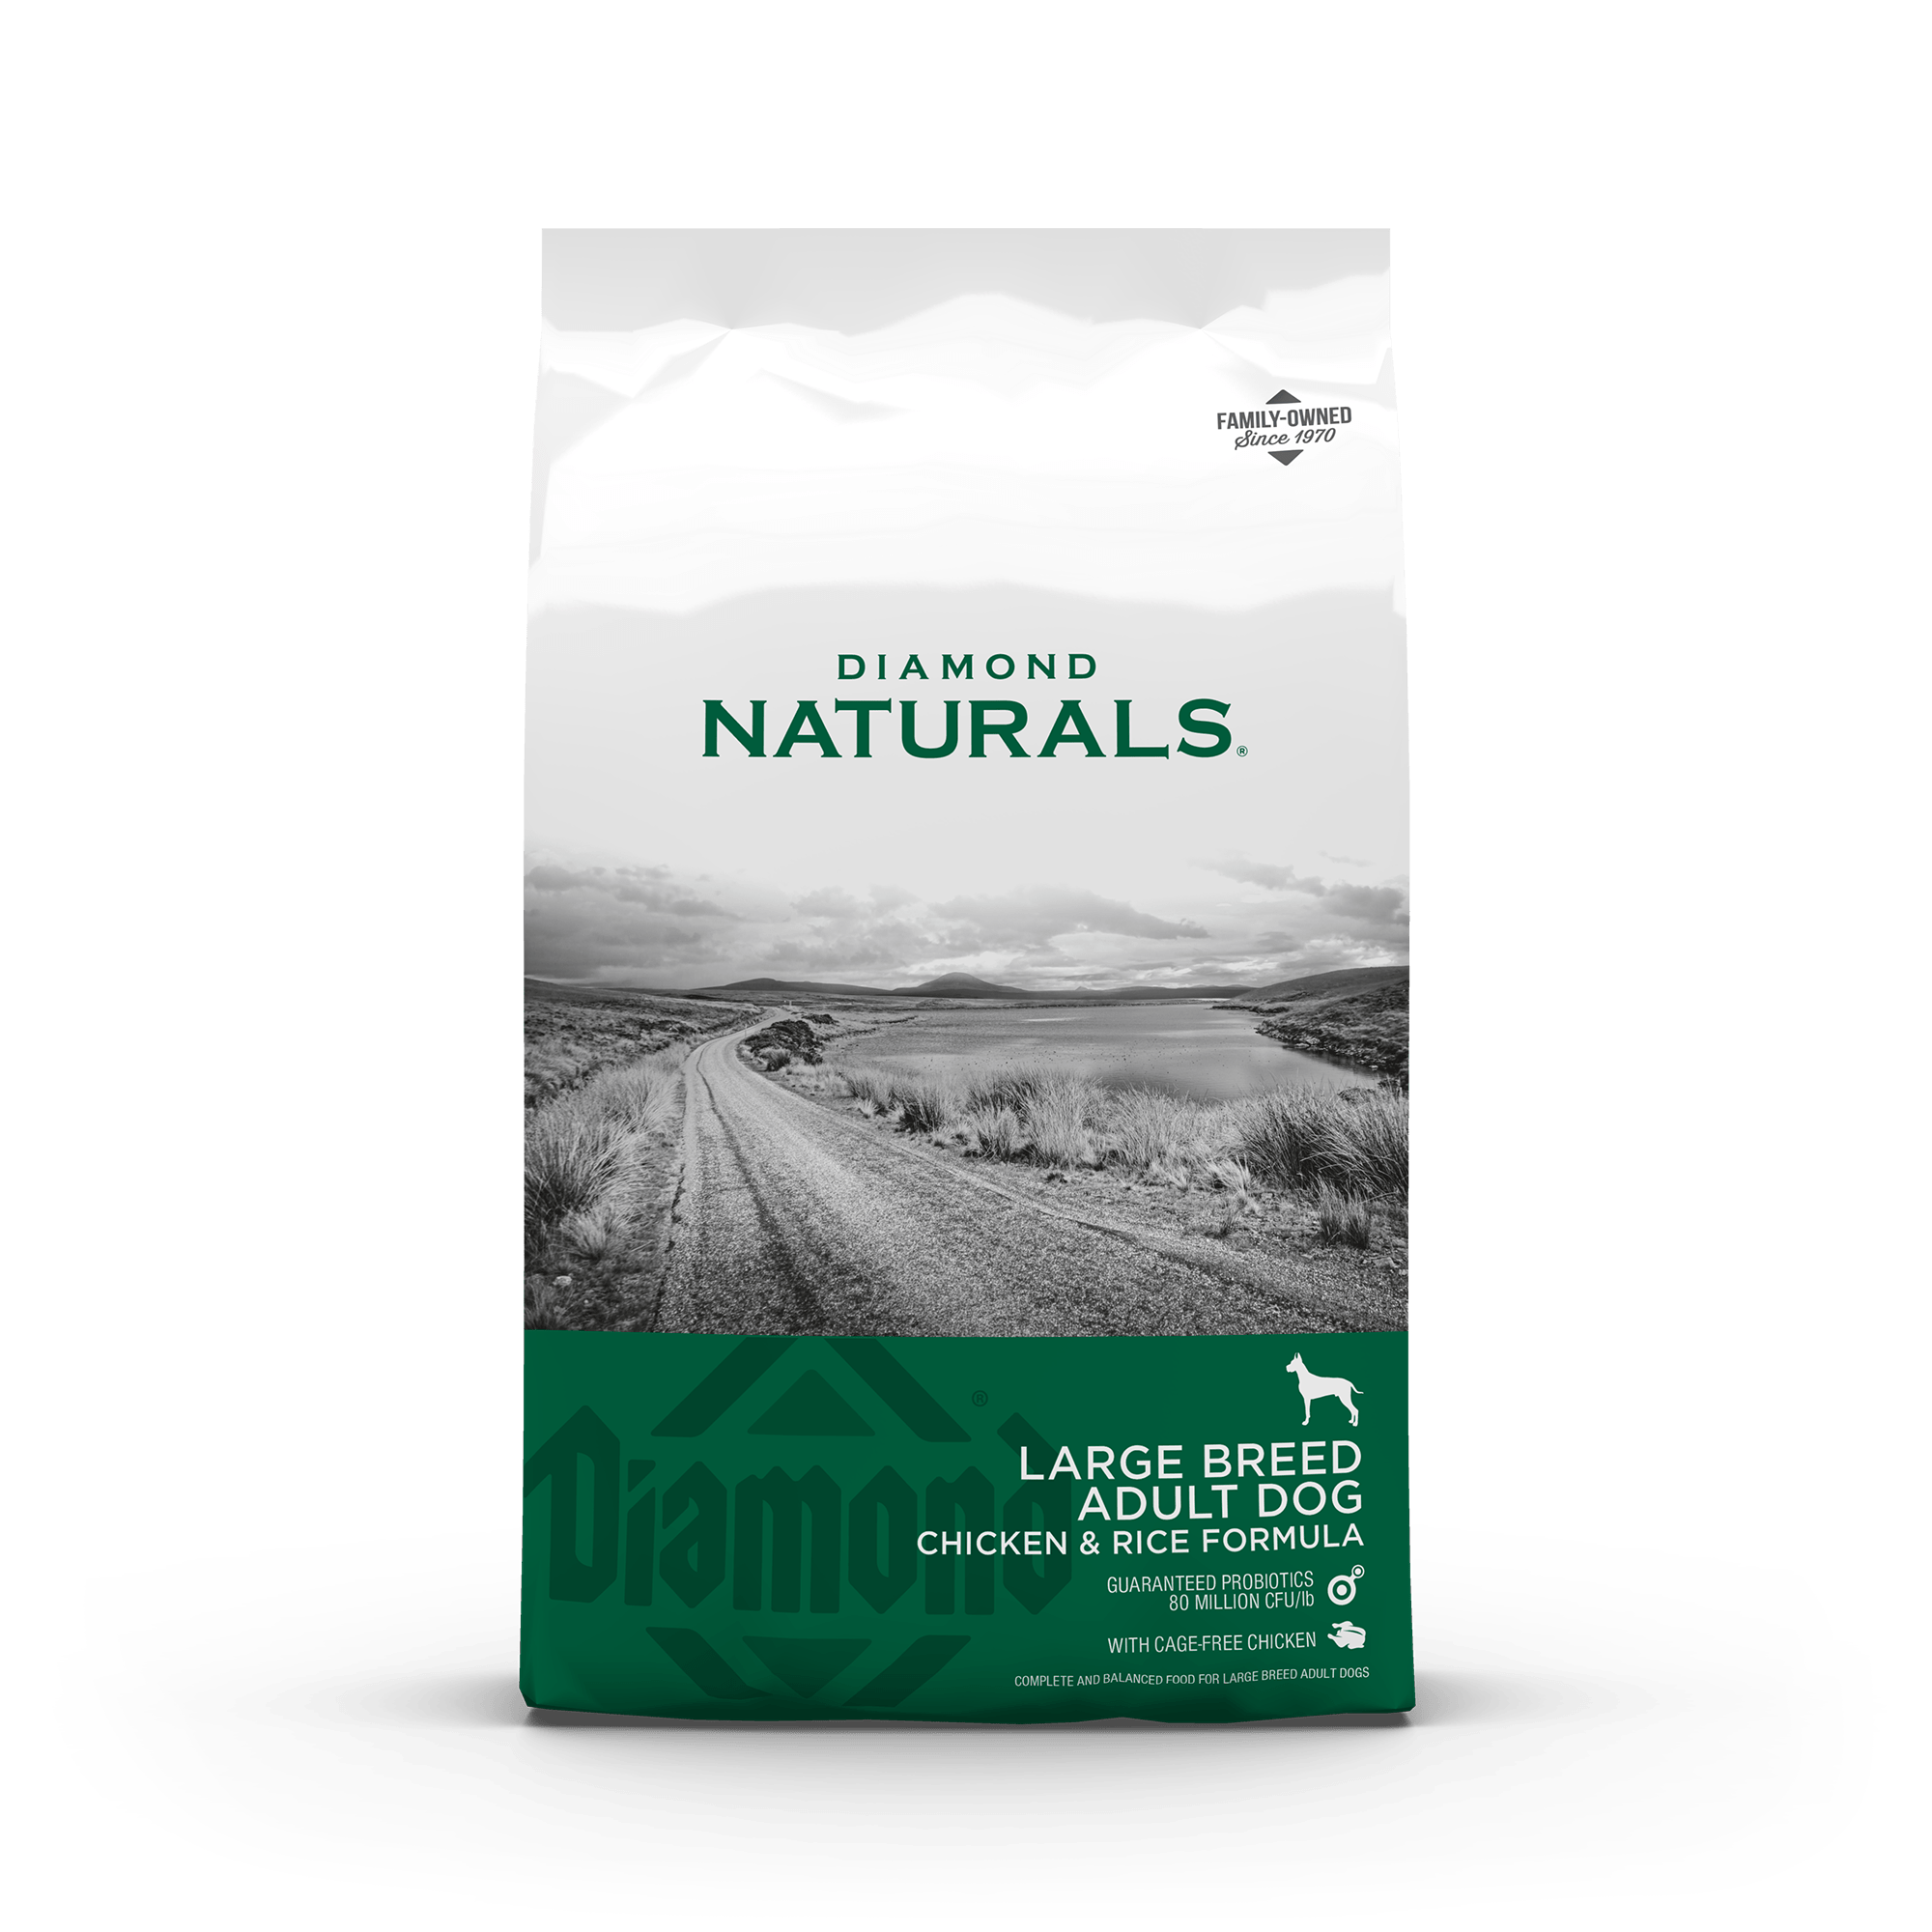 Diamond Naturals Large Breed Adult Dog Chicken & Rice Formula product packaging